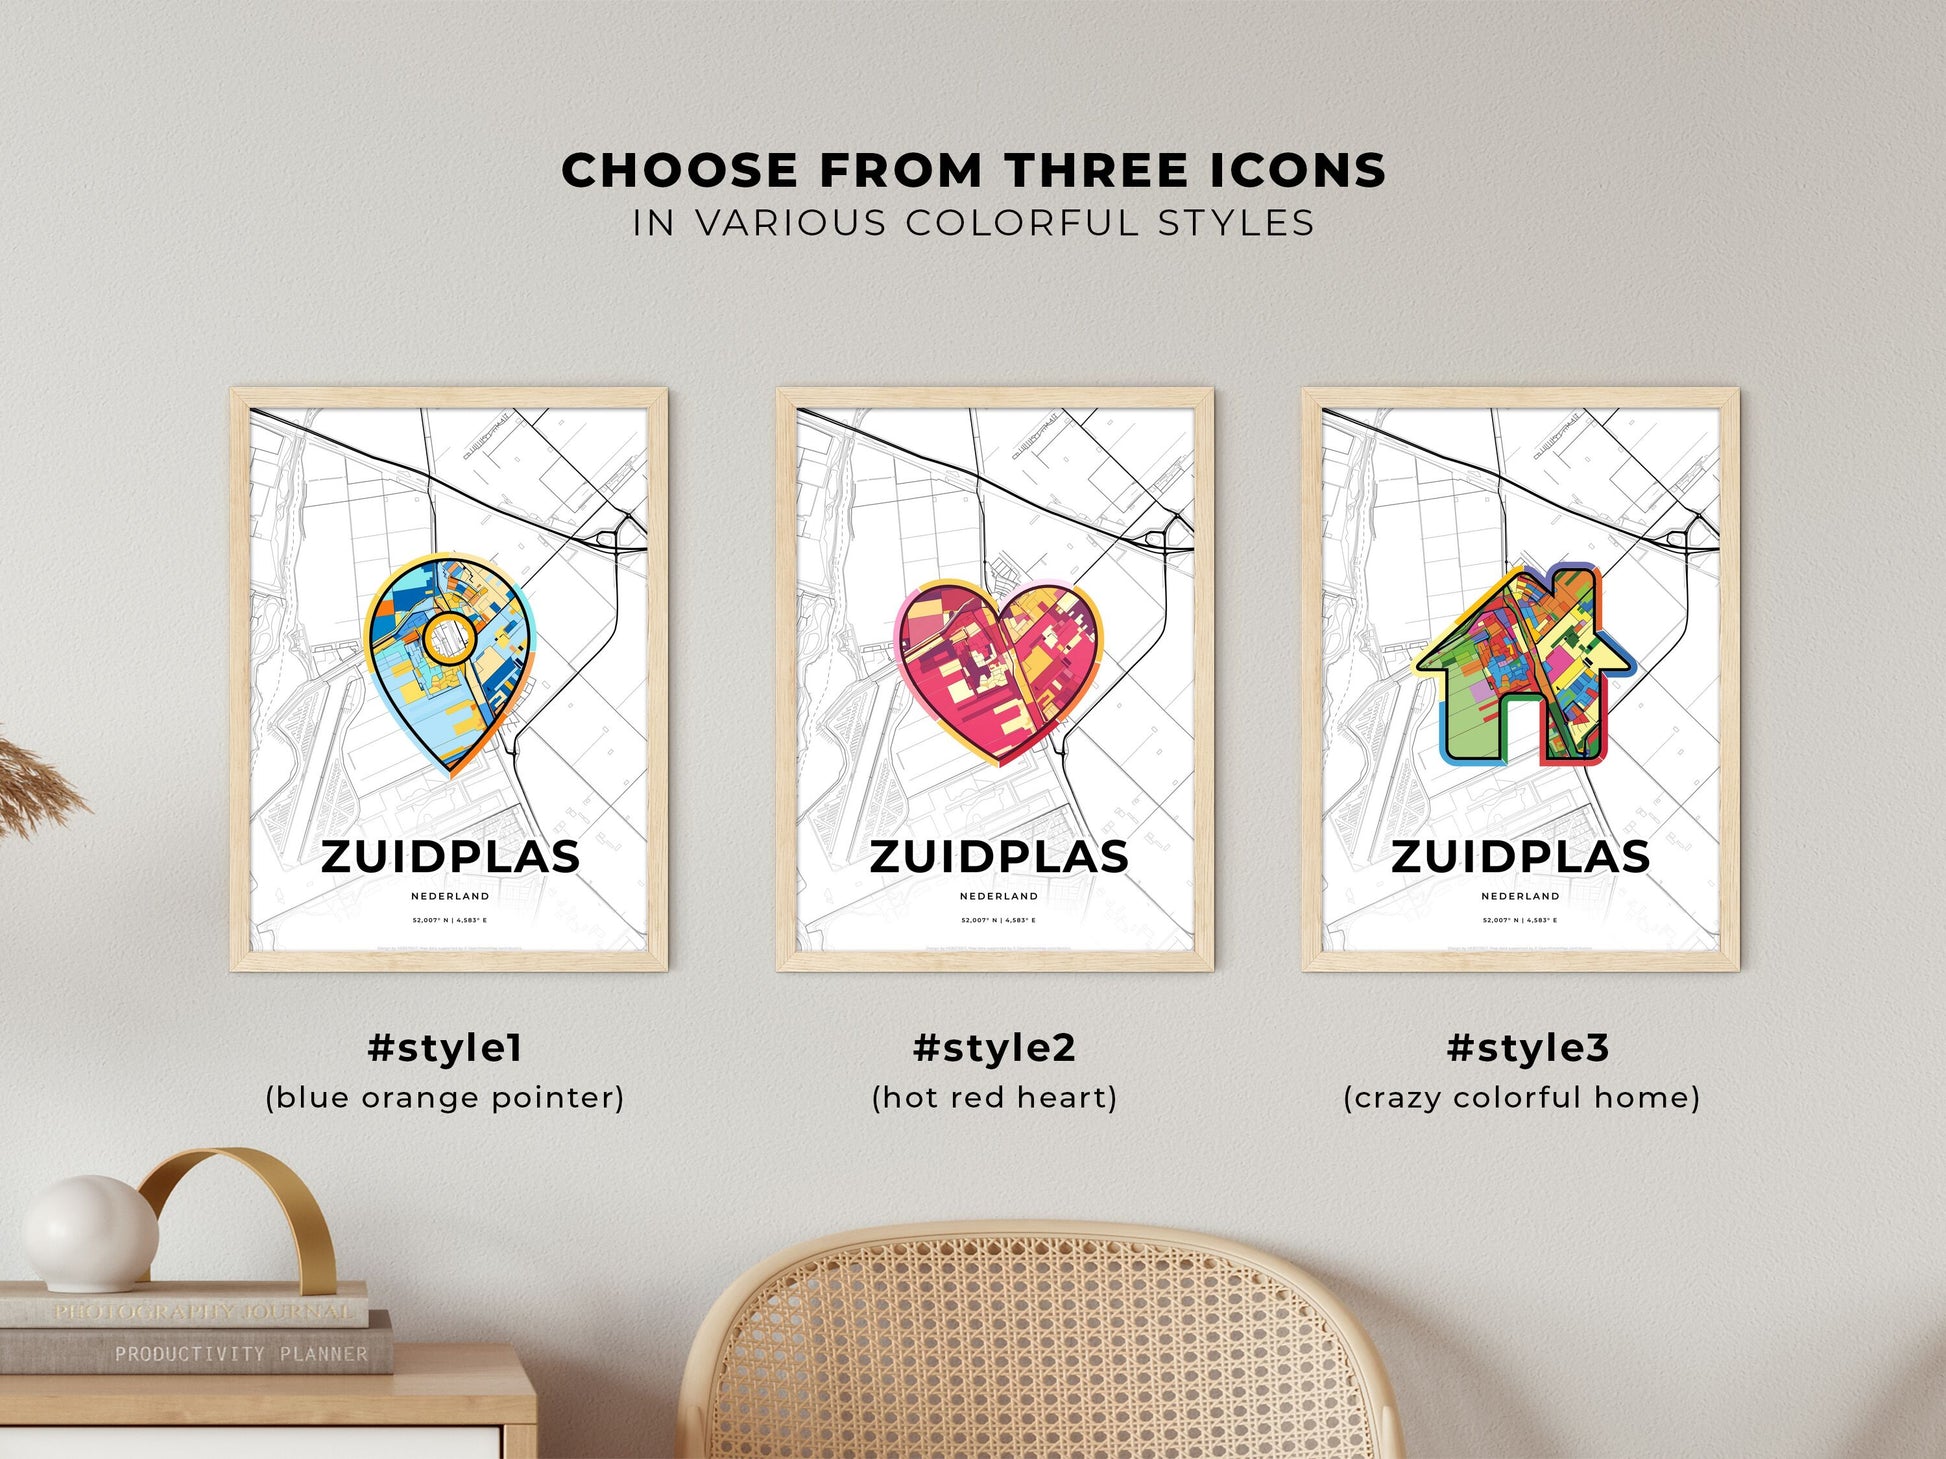 ZUIDPLAS NETHERLANDS minimal art map with a colorful icon. Where it all began, Couple map gift.